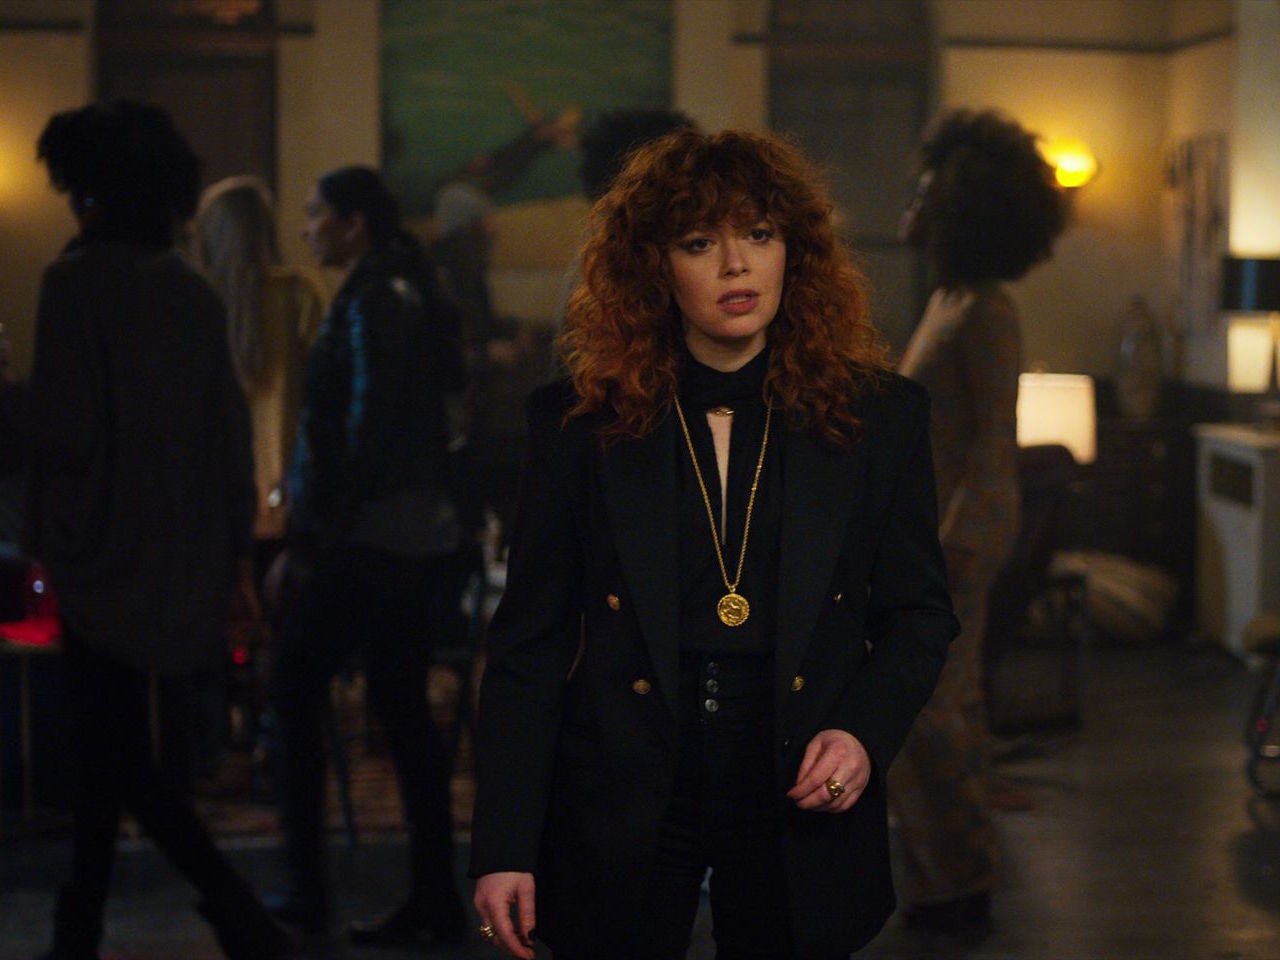 Netflix Russian Doll - a still from Netflix's Russian Doll shows Natasha Lyonne looking upset as she stands in a living room full of people